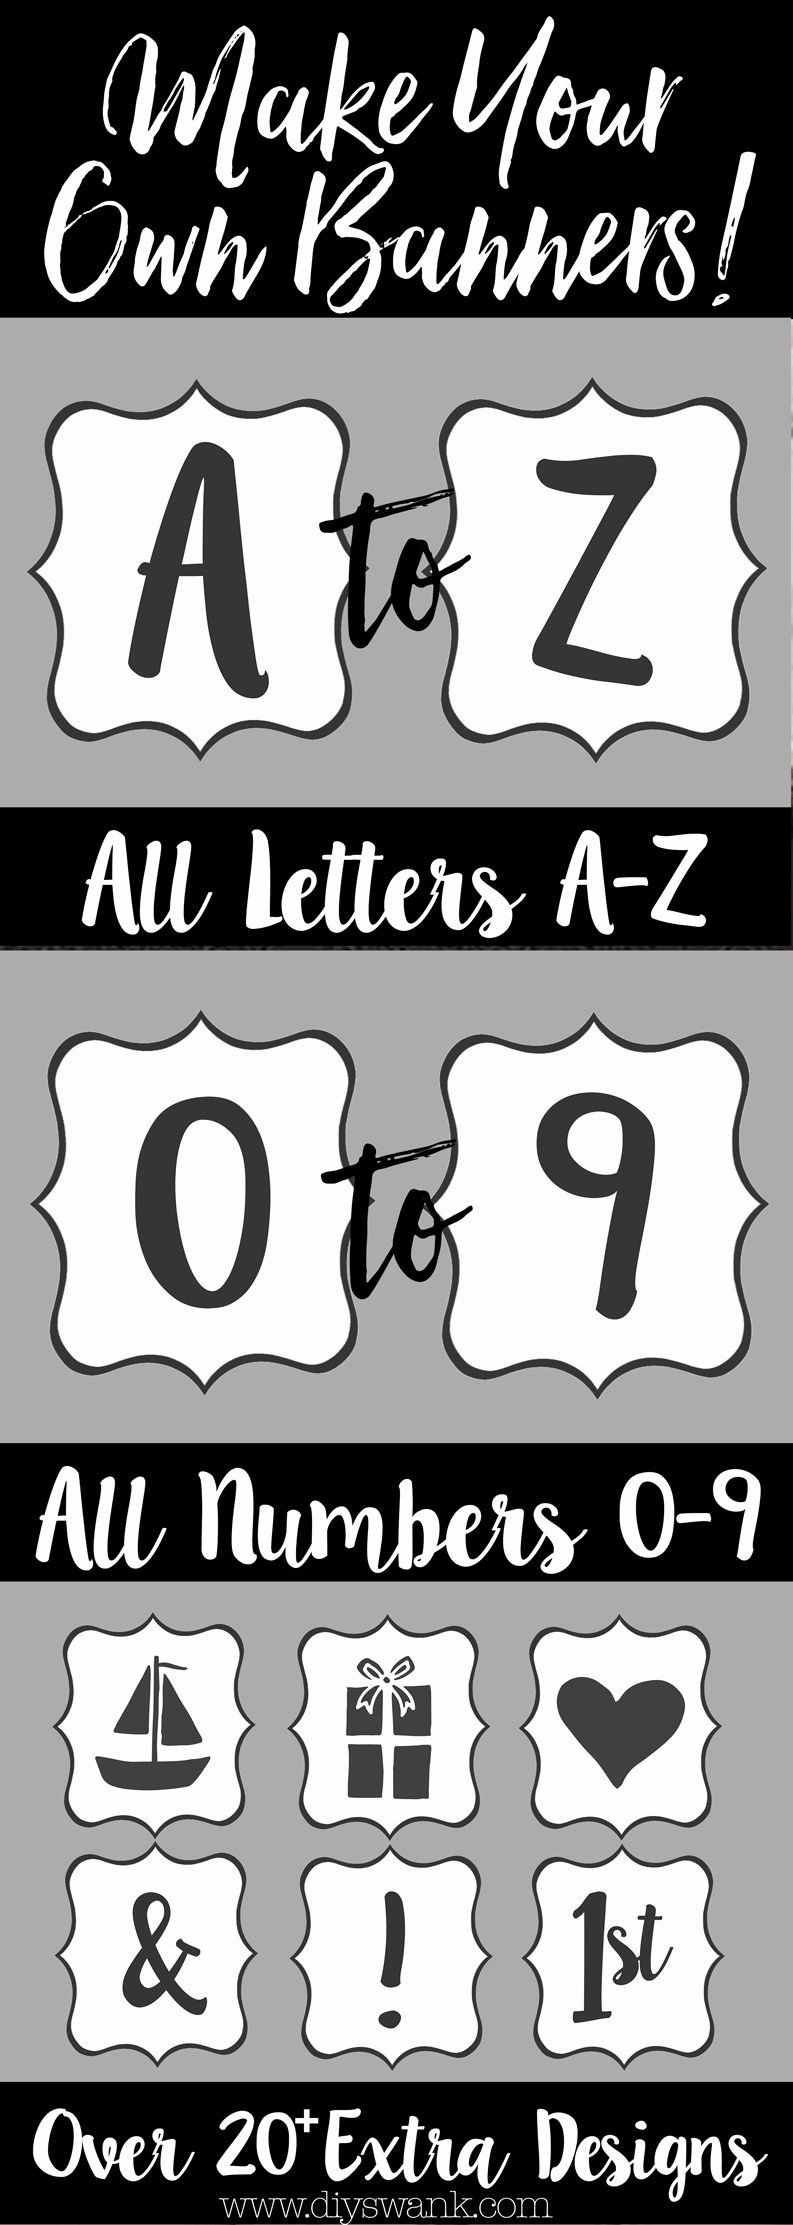 Free Printable Letters For Banners | Party Ideas | Printable Banner - Free Printable Letters Az